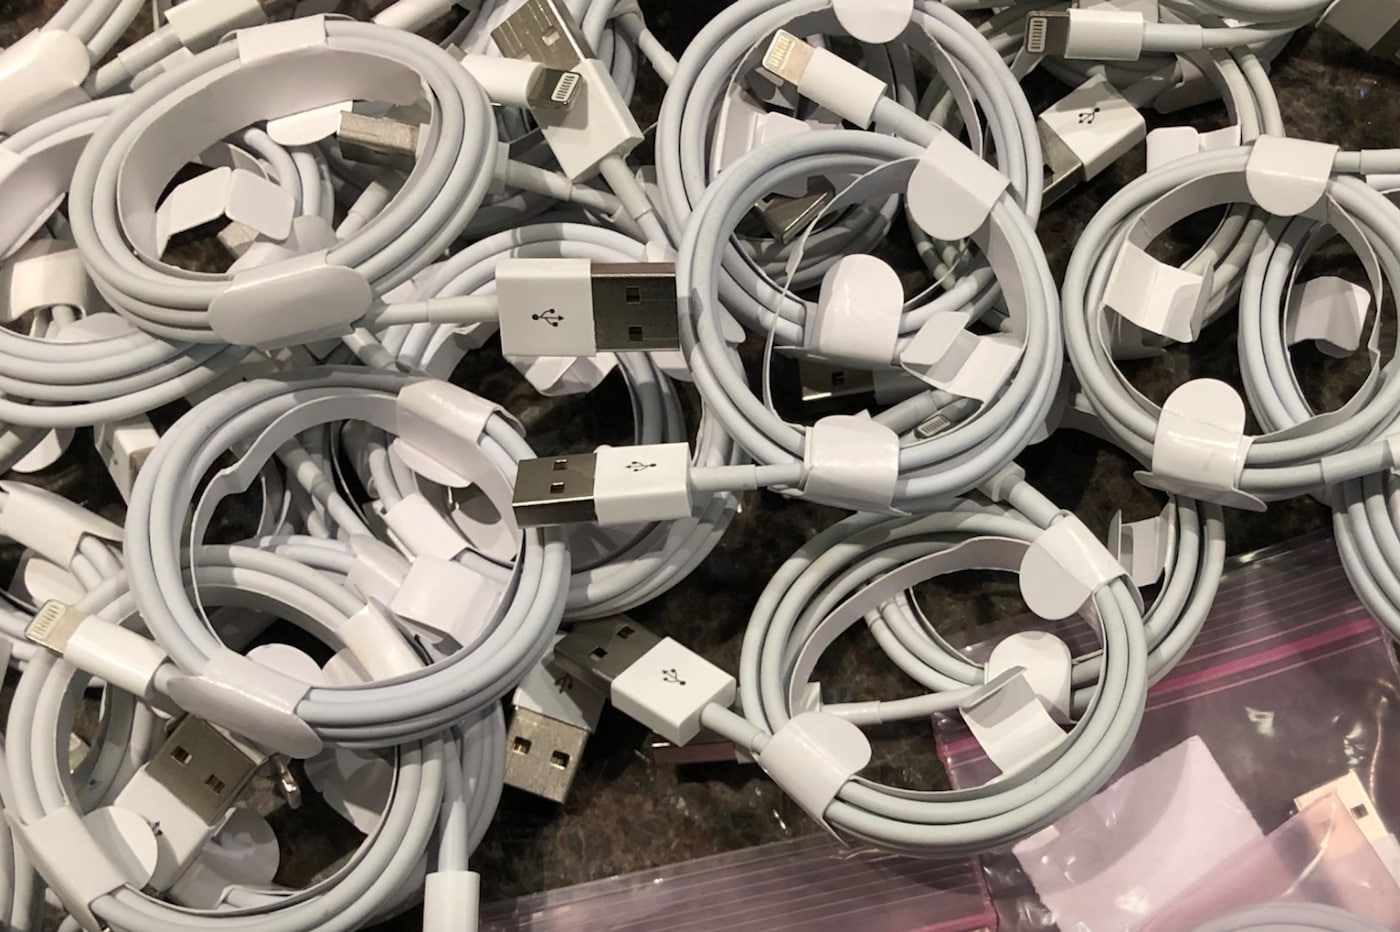 Cable USB Apple